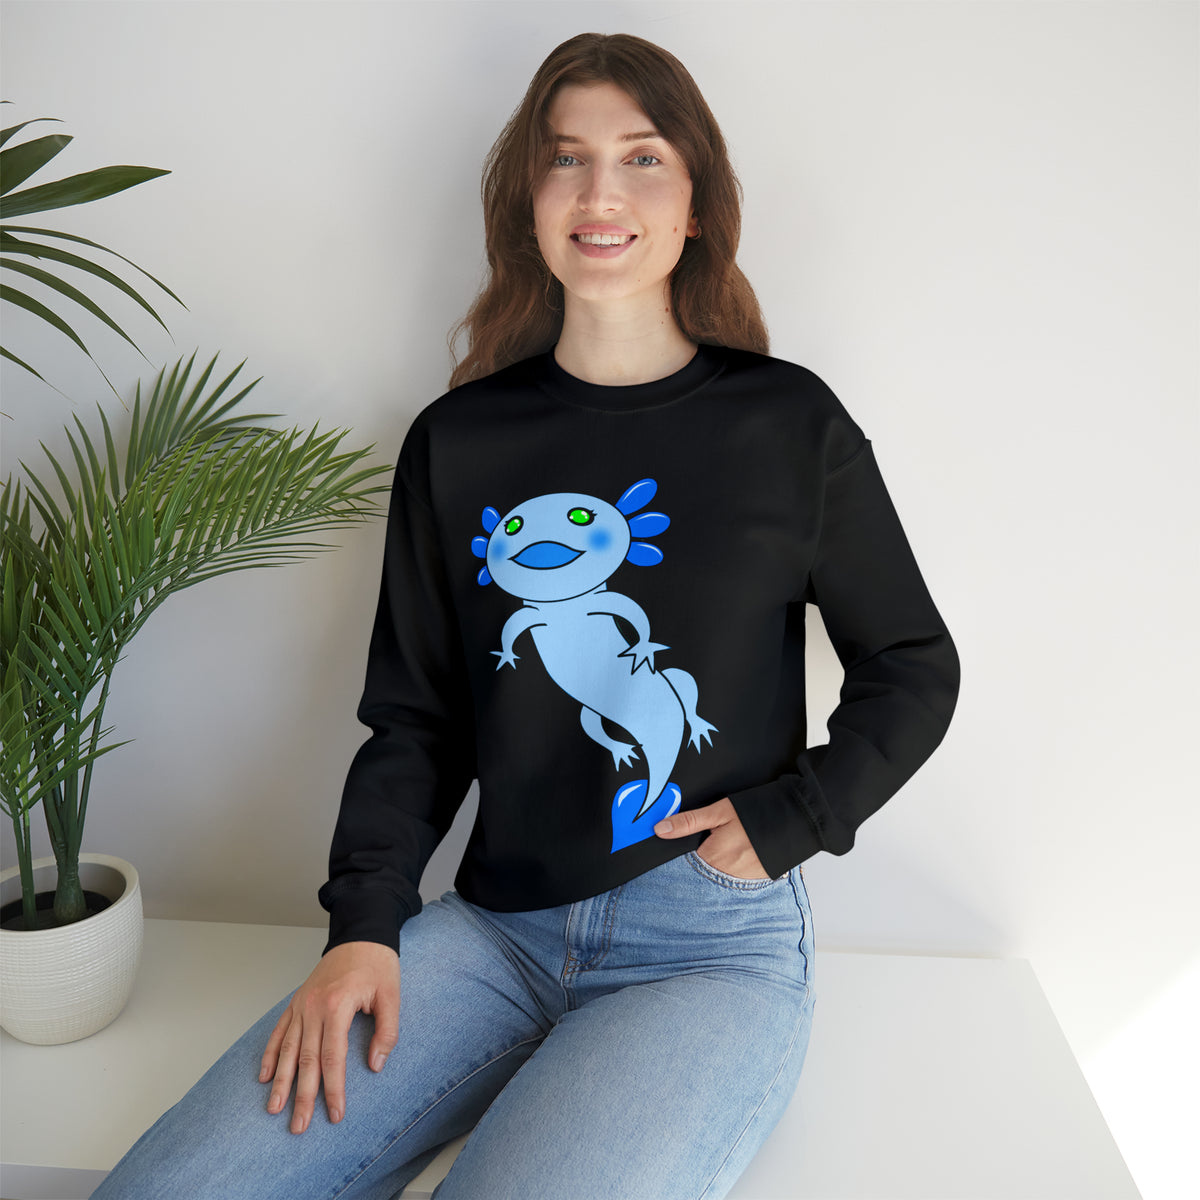 Adorable Blue Axolotl Sweatshirt | Cozy Blend of Cotton and Polyester | Relaxed Fit for Comfort